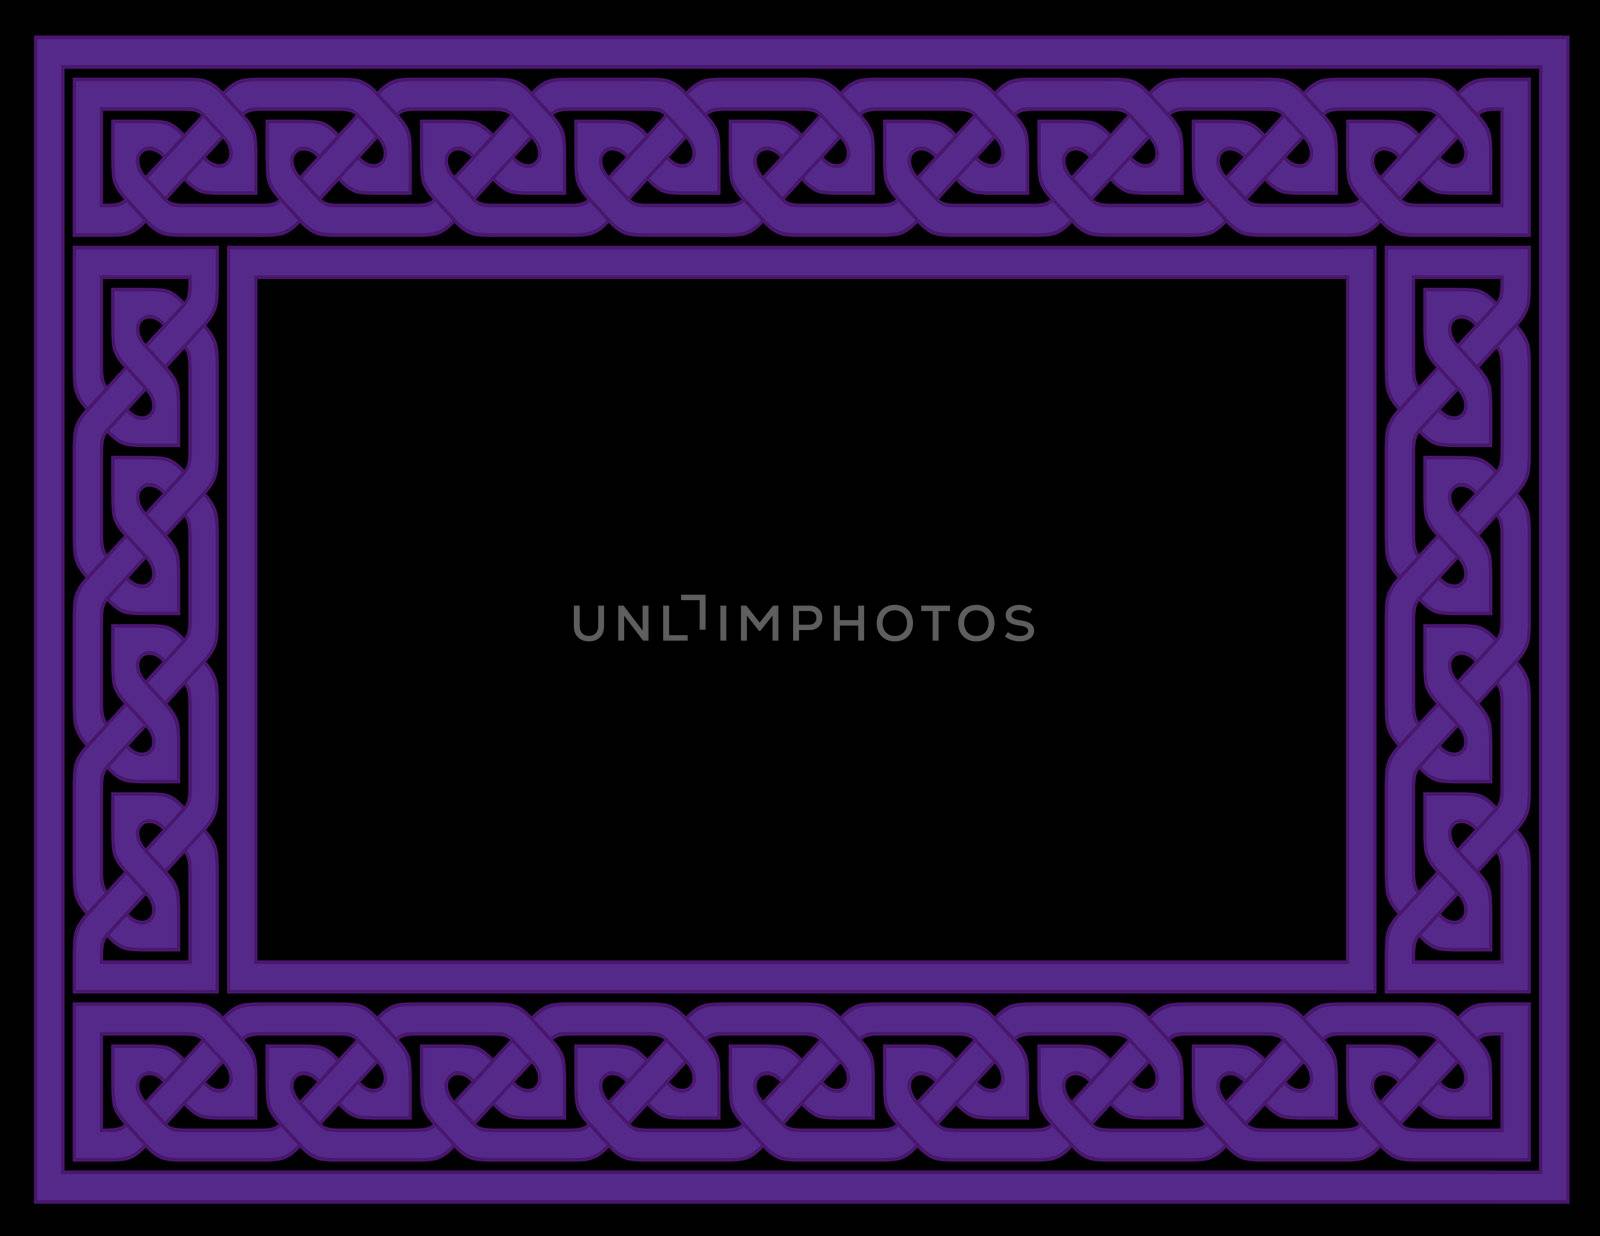 A Celtic knot frame in purple with black background, JPG version.